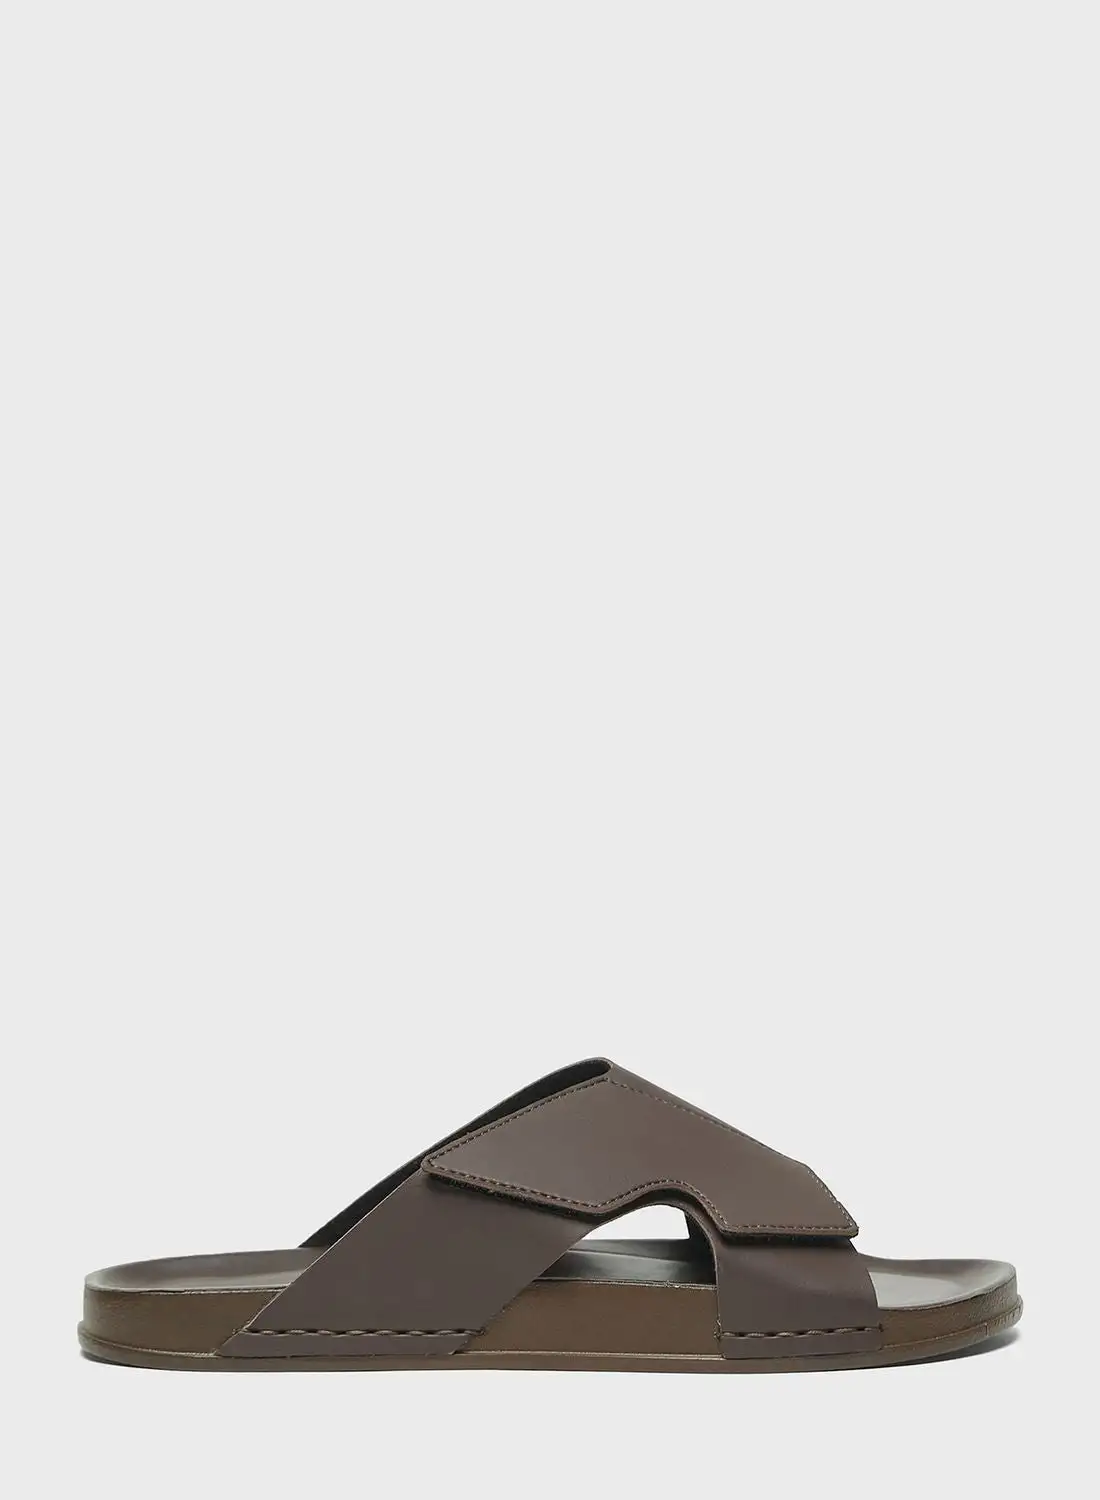 LBL by Shoexpress Casual Cross Strap Sandals